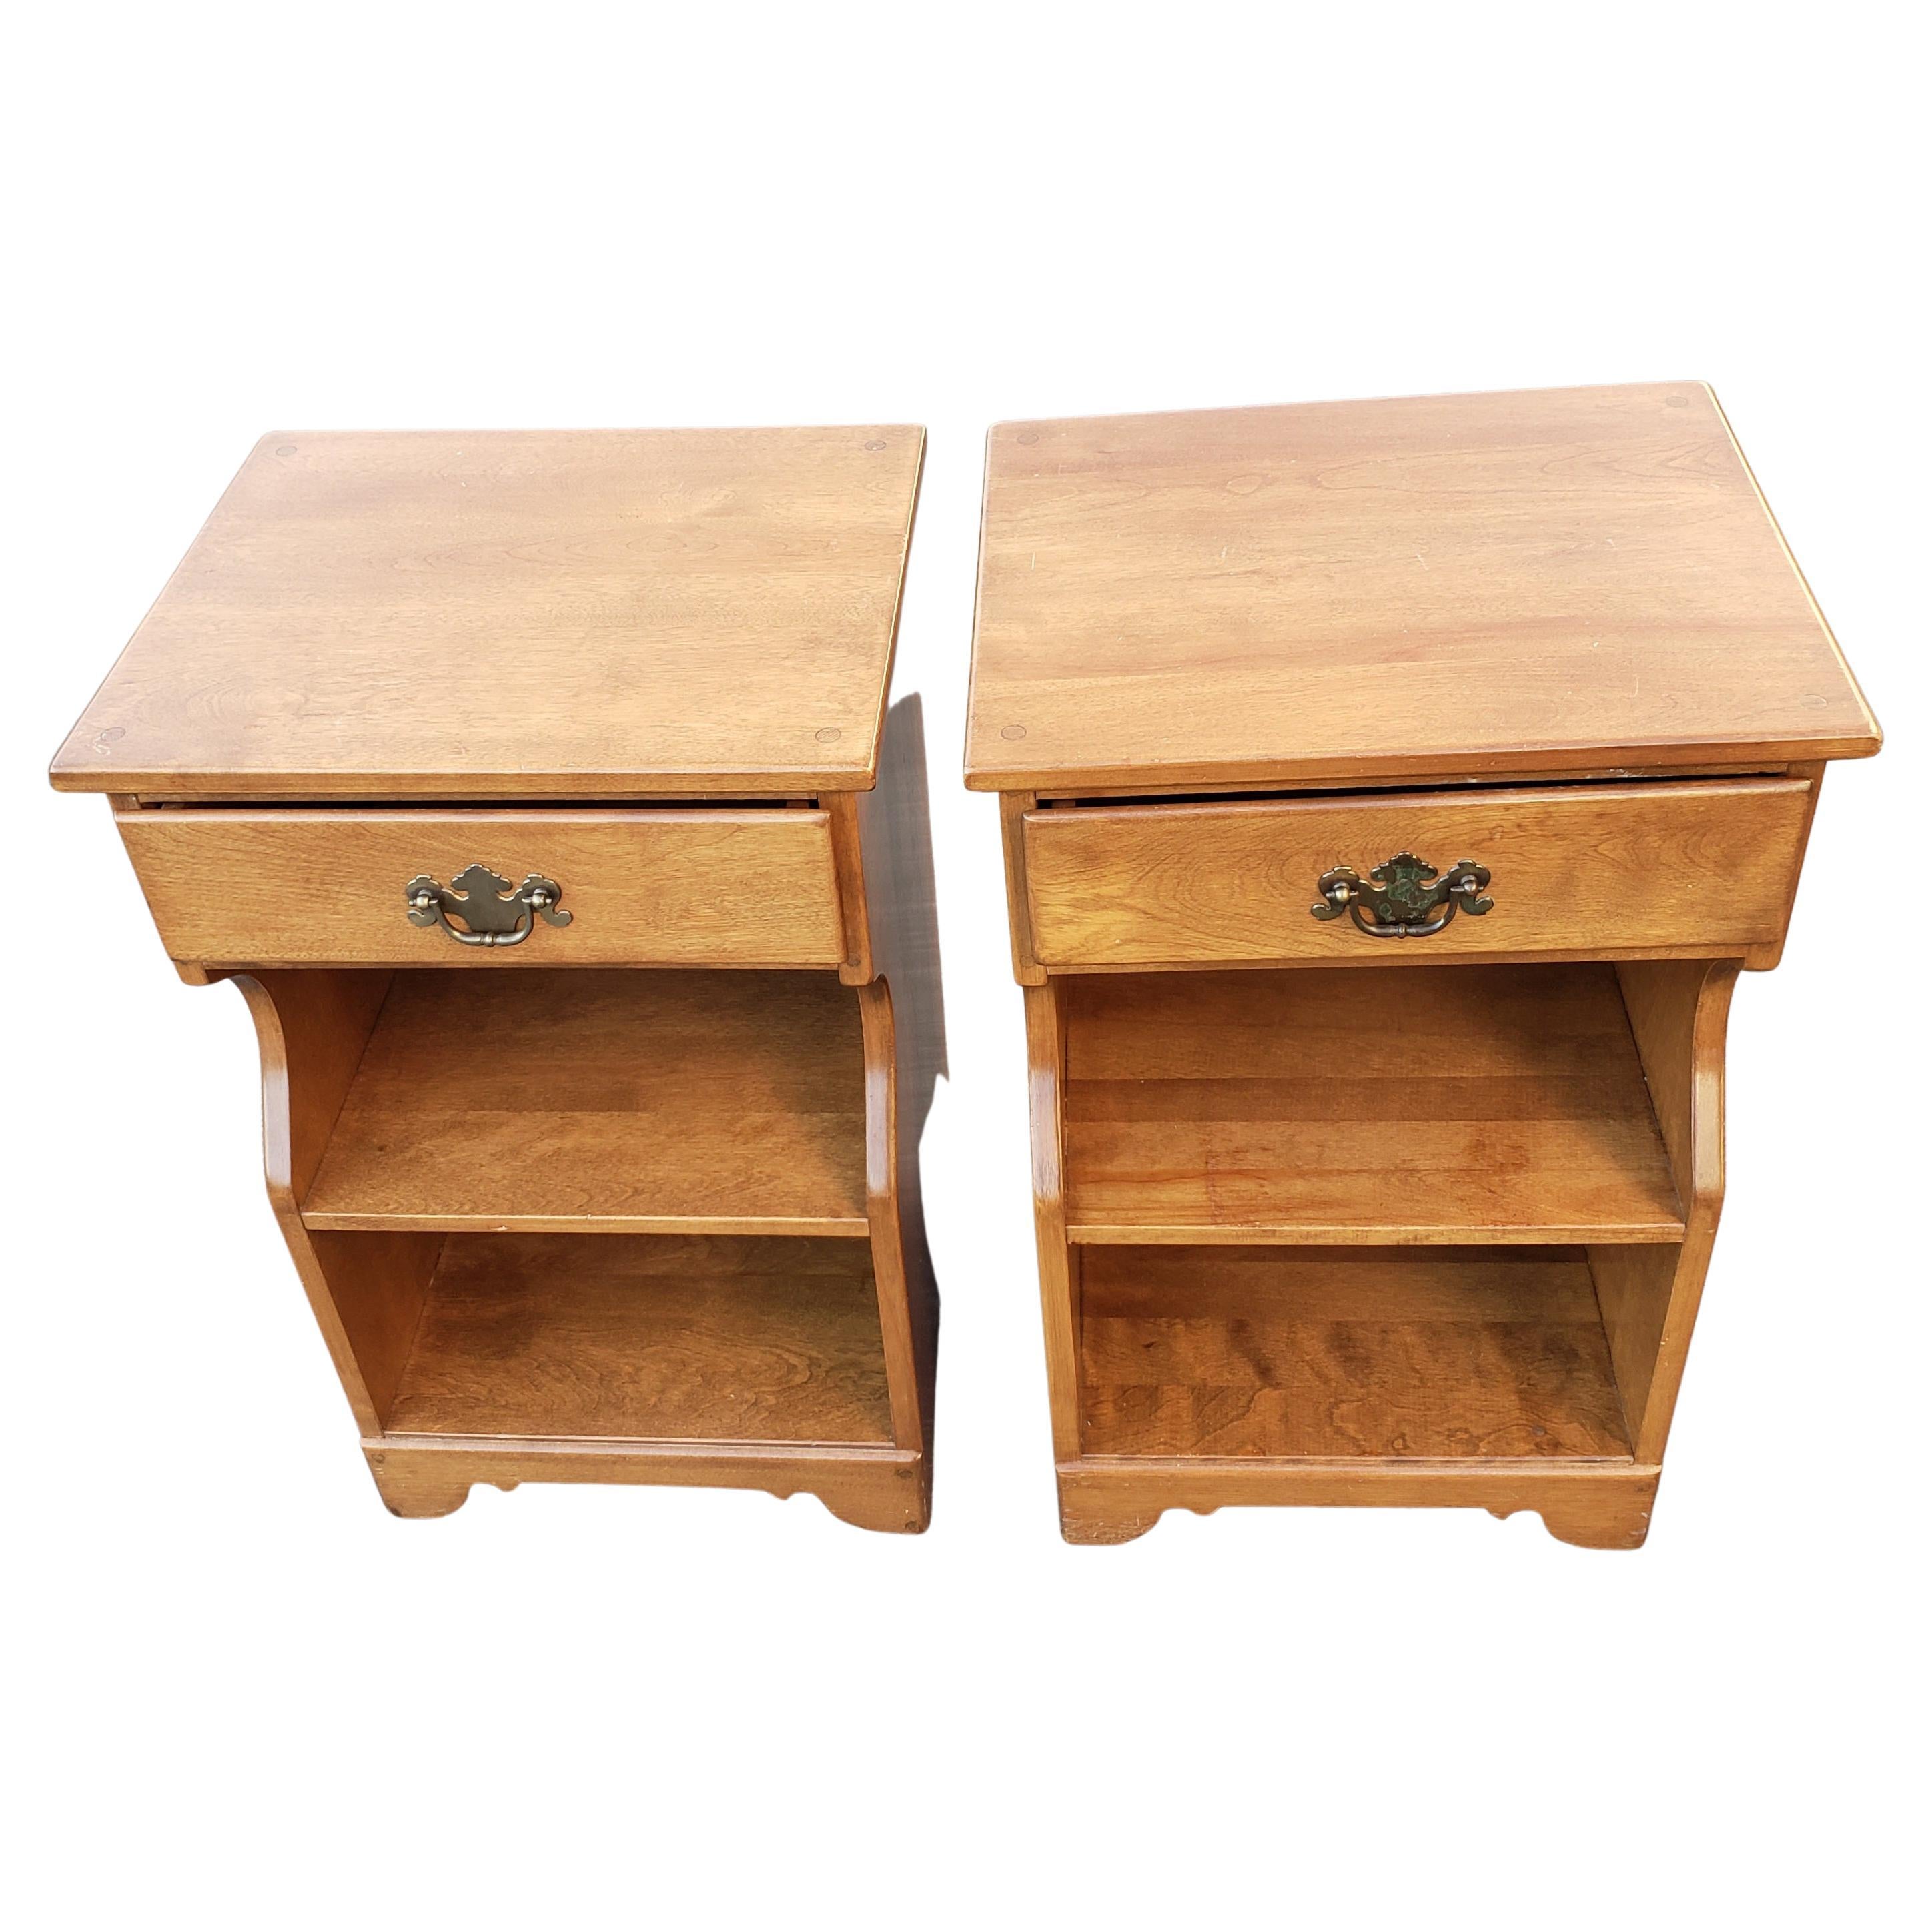 Beautiful pair of Ethan Allen 3-tier Maple with top drawer nightstands. This are one of the pieces designed by the founder of Ethan Allen, Theodore Baumritter. These jewels date from the 1960s. Very good vintage condition. Some wear, appropriate